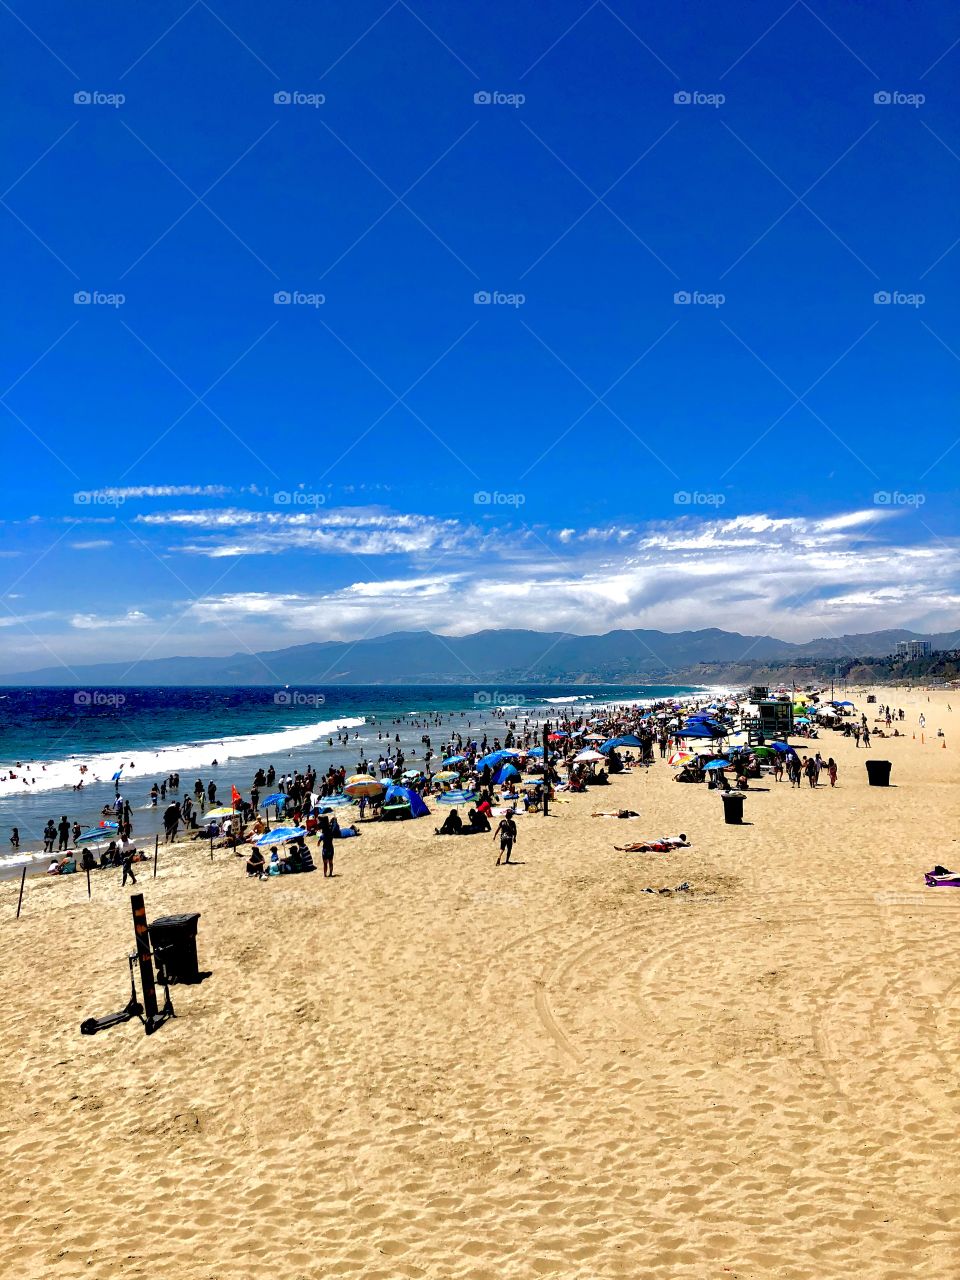 Santa Monica Beach in sunny California. Warm sand and blue waves make the perfect beach day in this vacation getaway